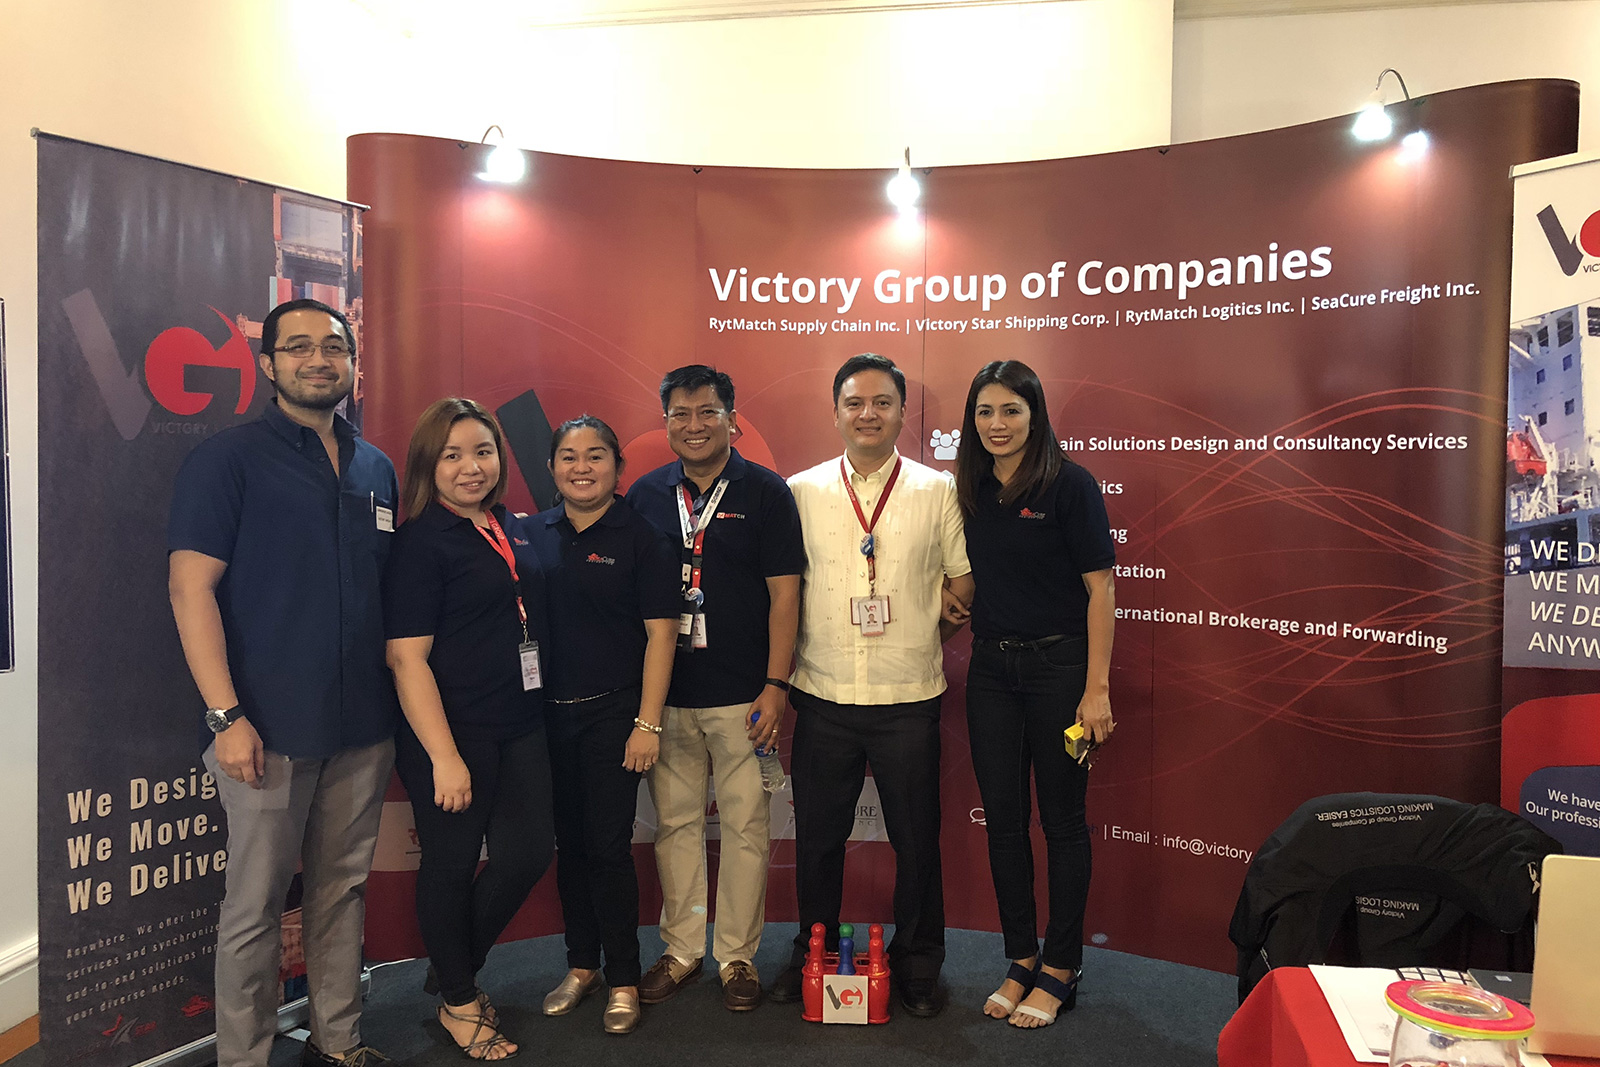 Victory Group joins the SCMAP Conference